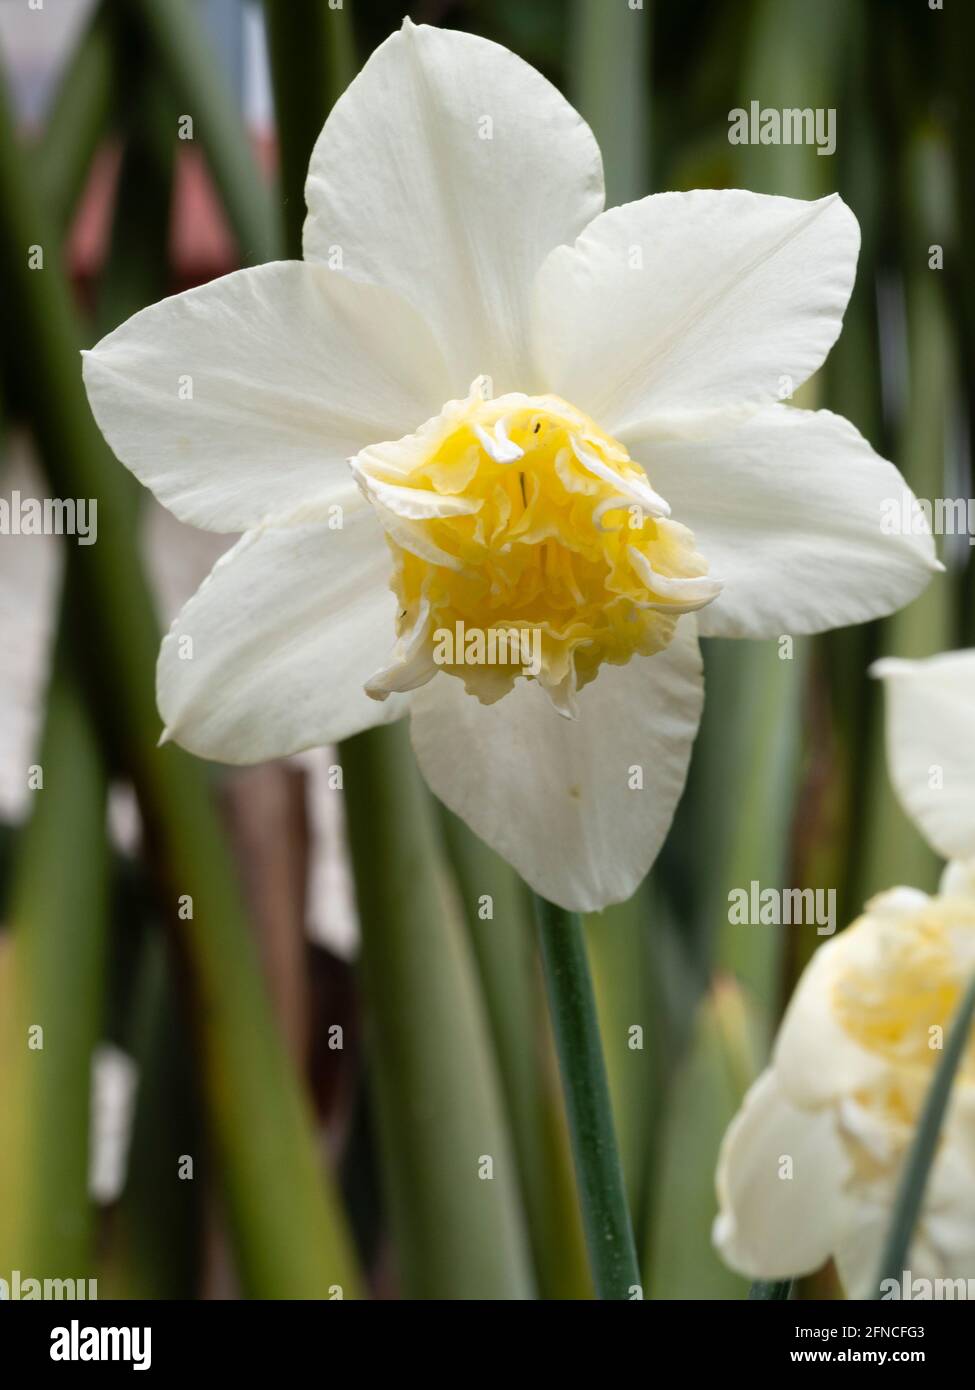 Double corona and white tepals of the triandrus type daffodil, Narcissus 'White Marvel' Stock Photo